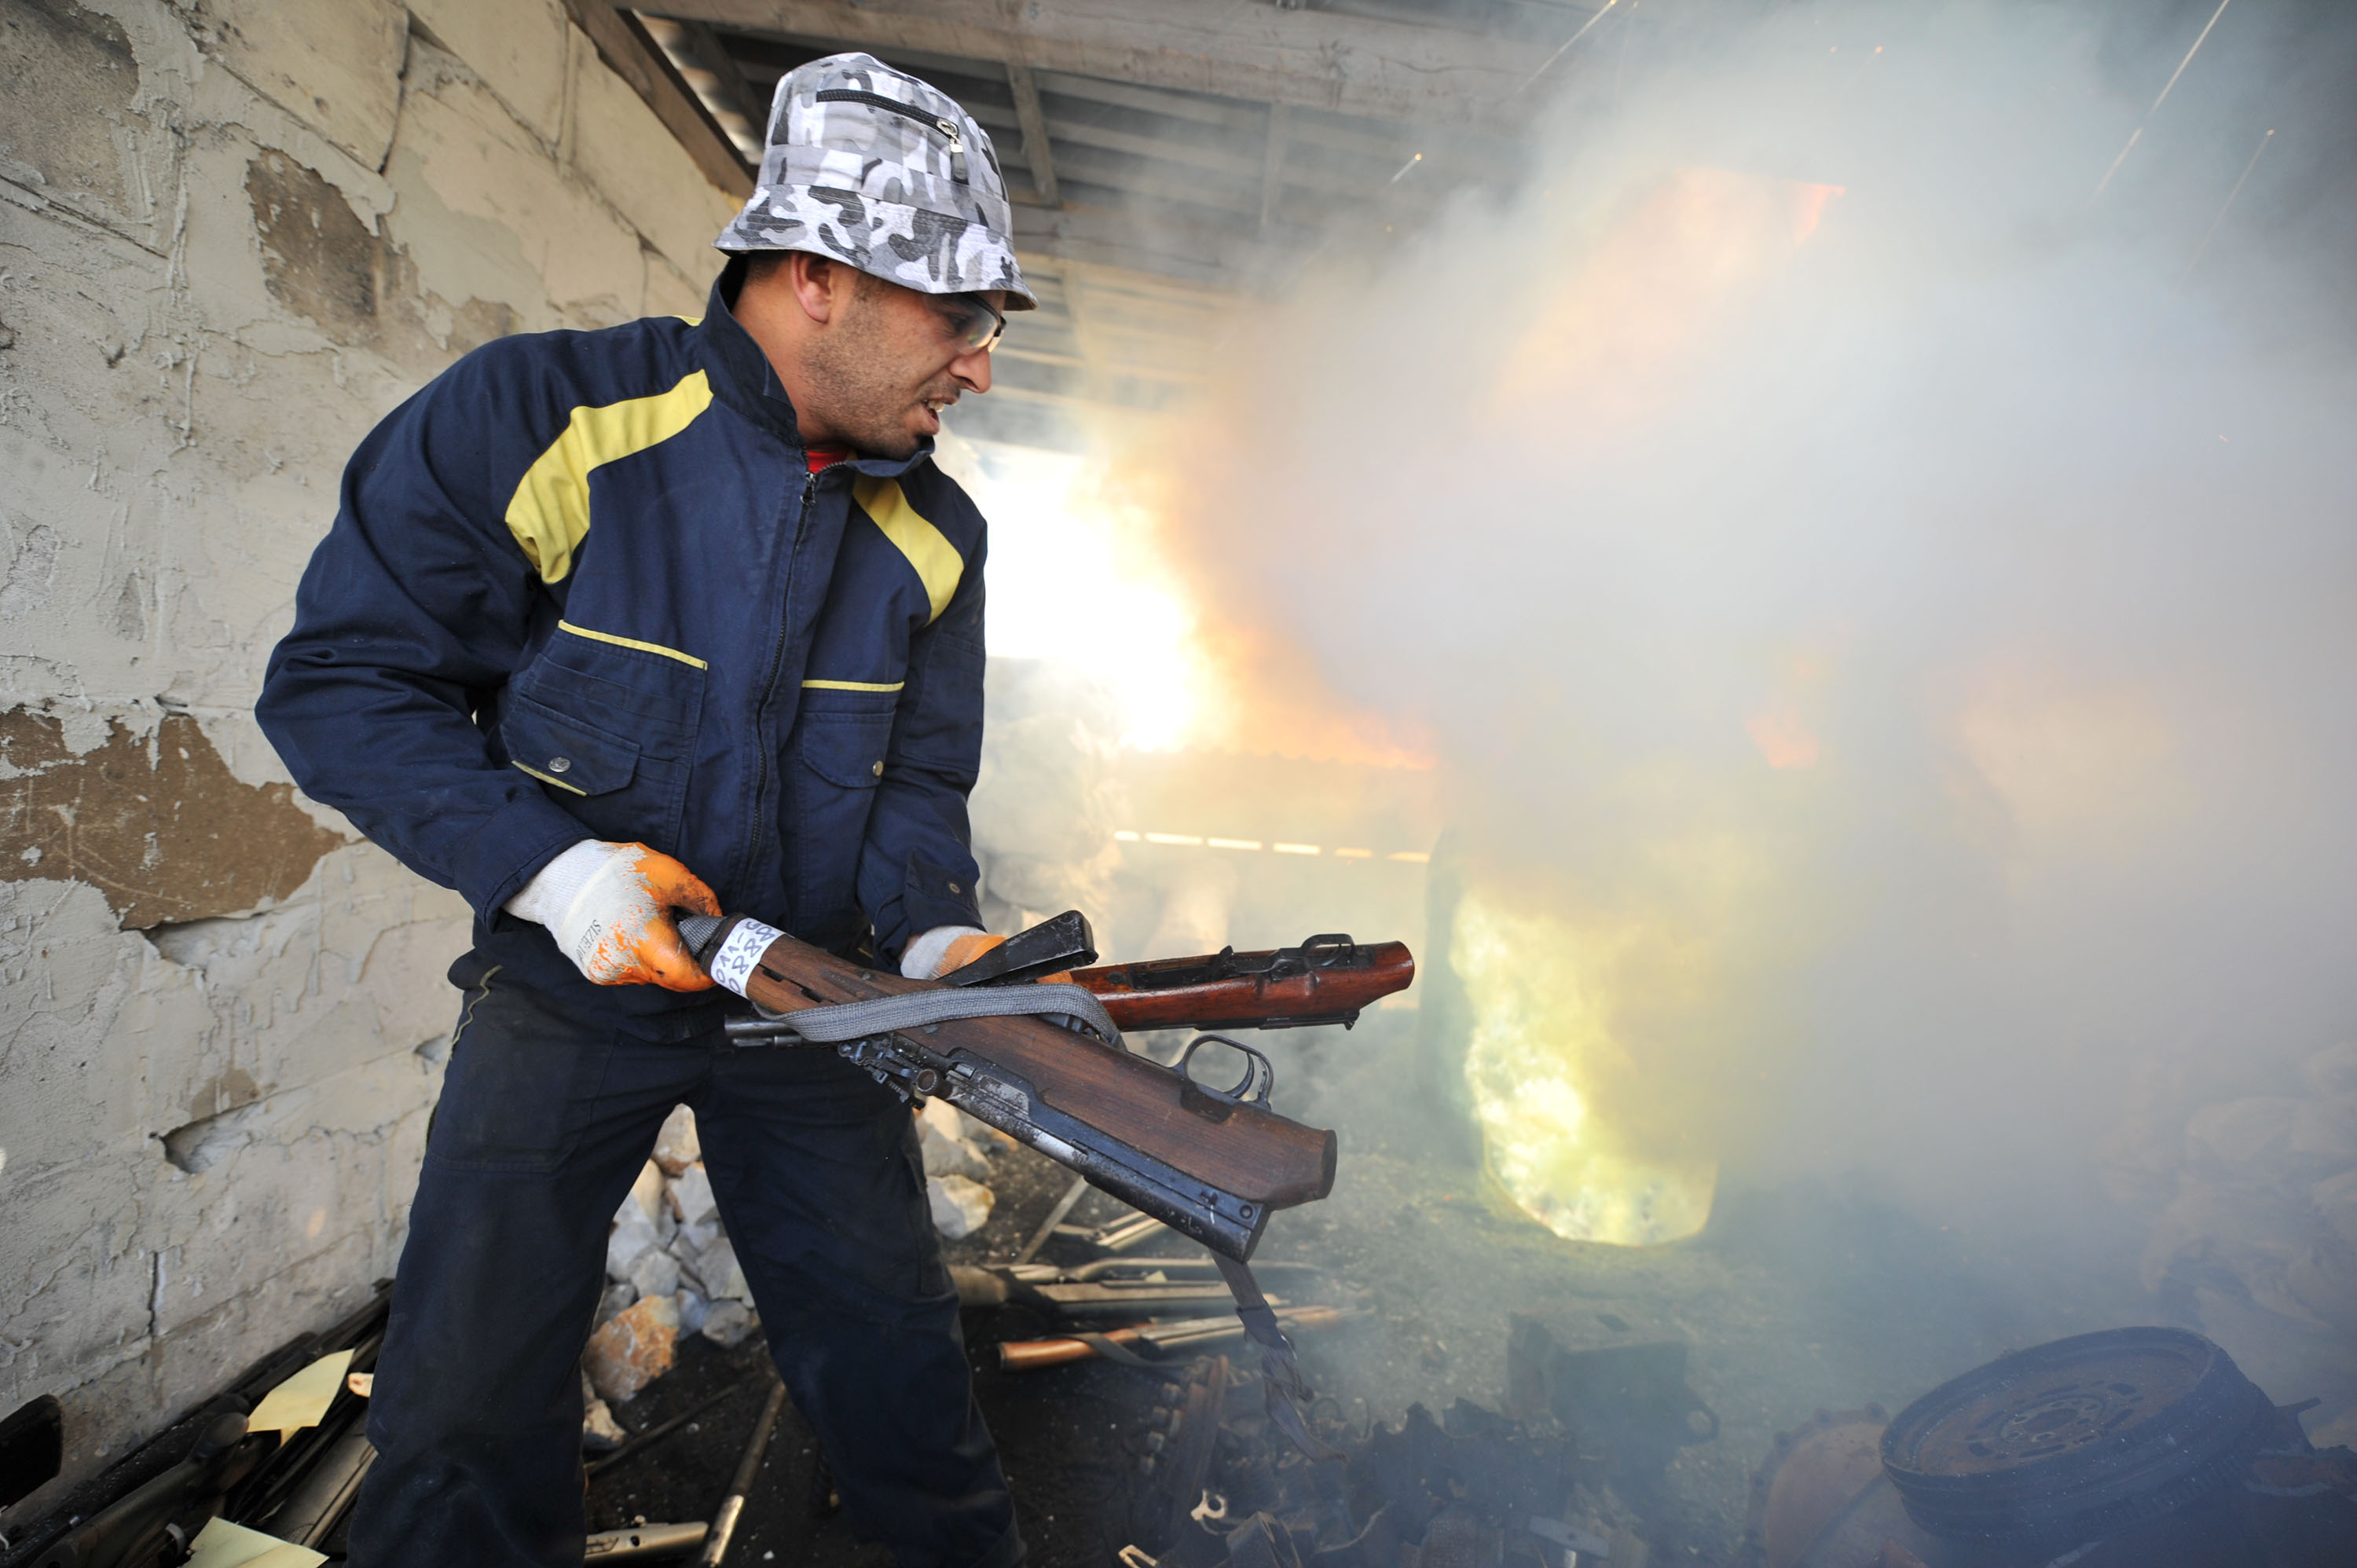 A man wearing long sleeved pants, shirt, gloves, a hat and sunglasses holds two guns and is about to throw them into a fire as part of a gun destruction programme.